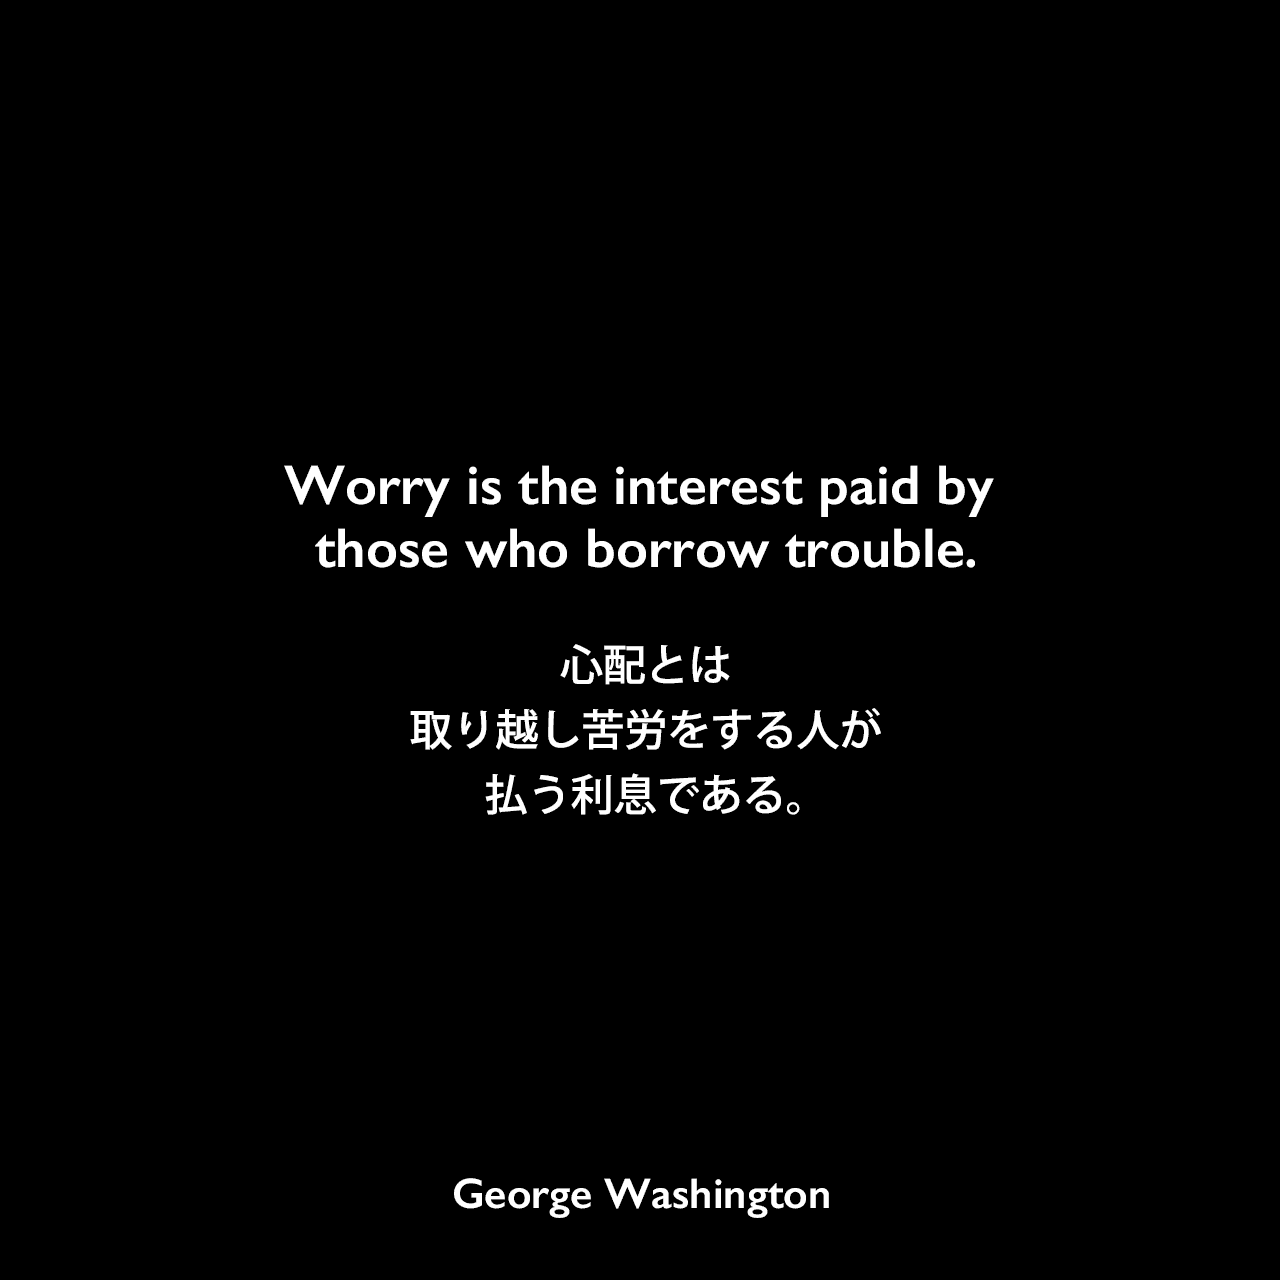 Worry is the interest paid by those who borrow trouble.心配とは、取り越し苦労をする人が払う利息である。George Washington